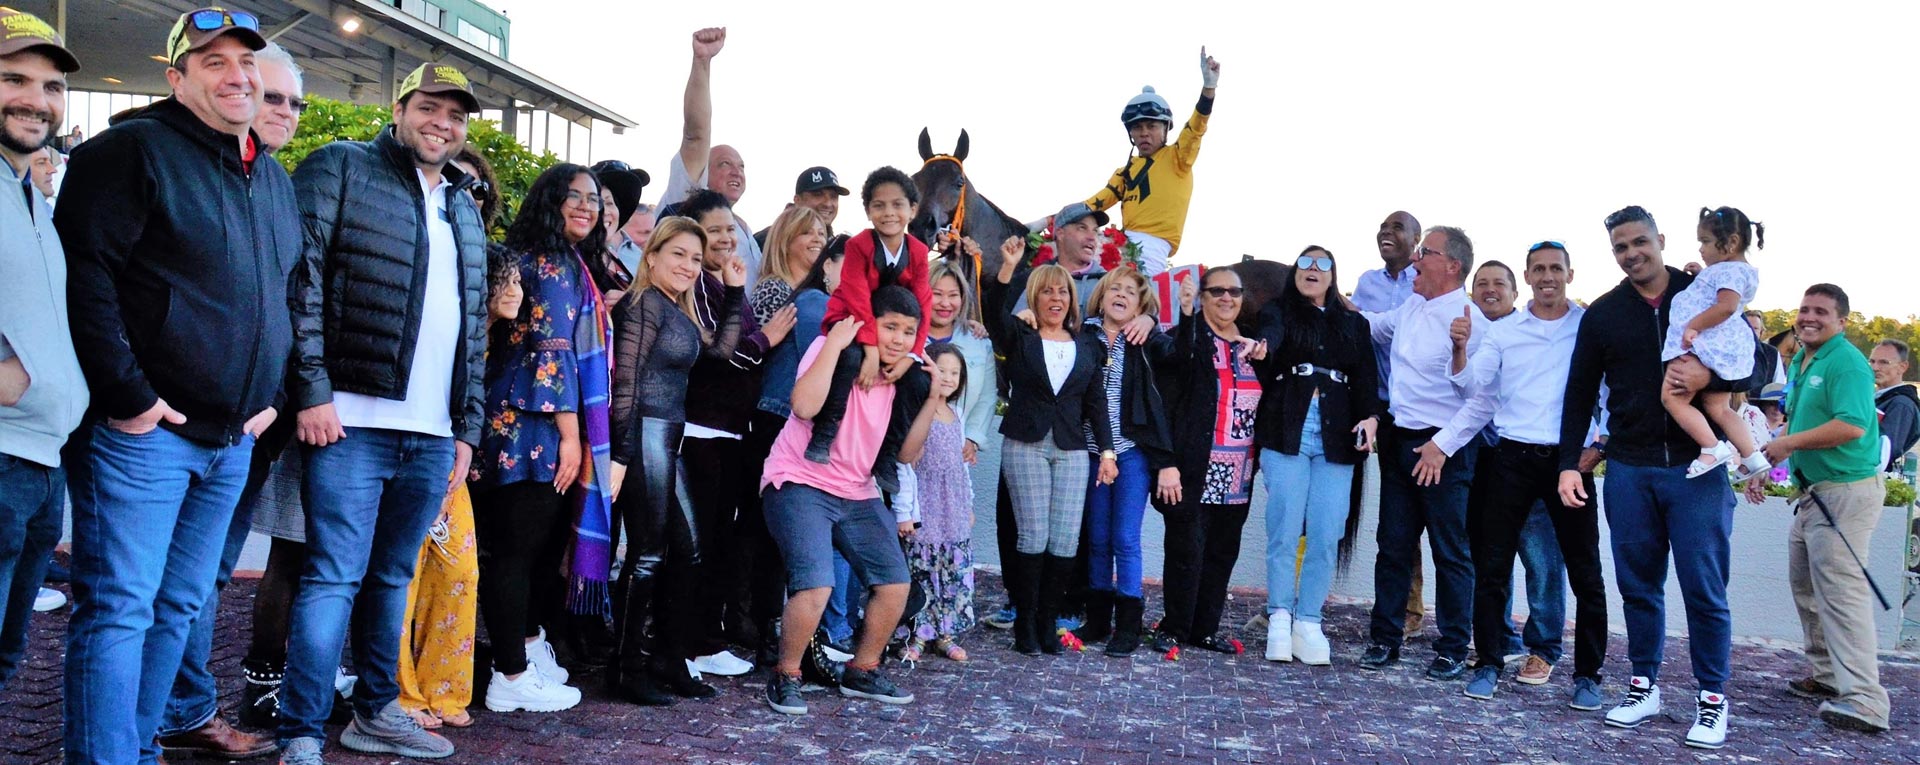 Venezuelans are Top Kentucky Derby Contenders Once Again>